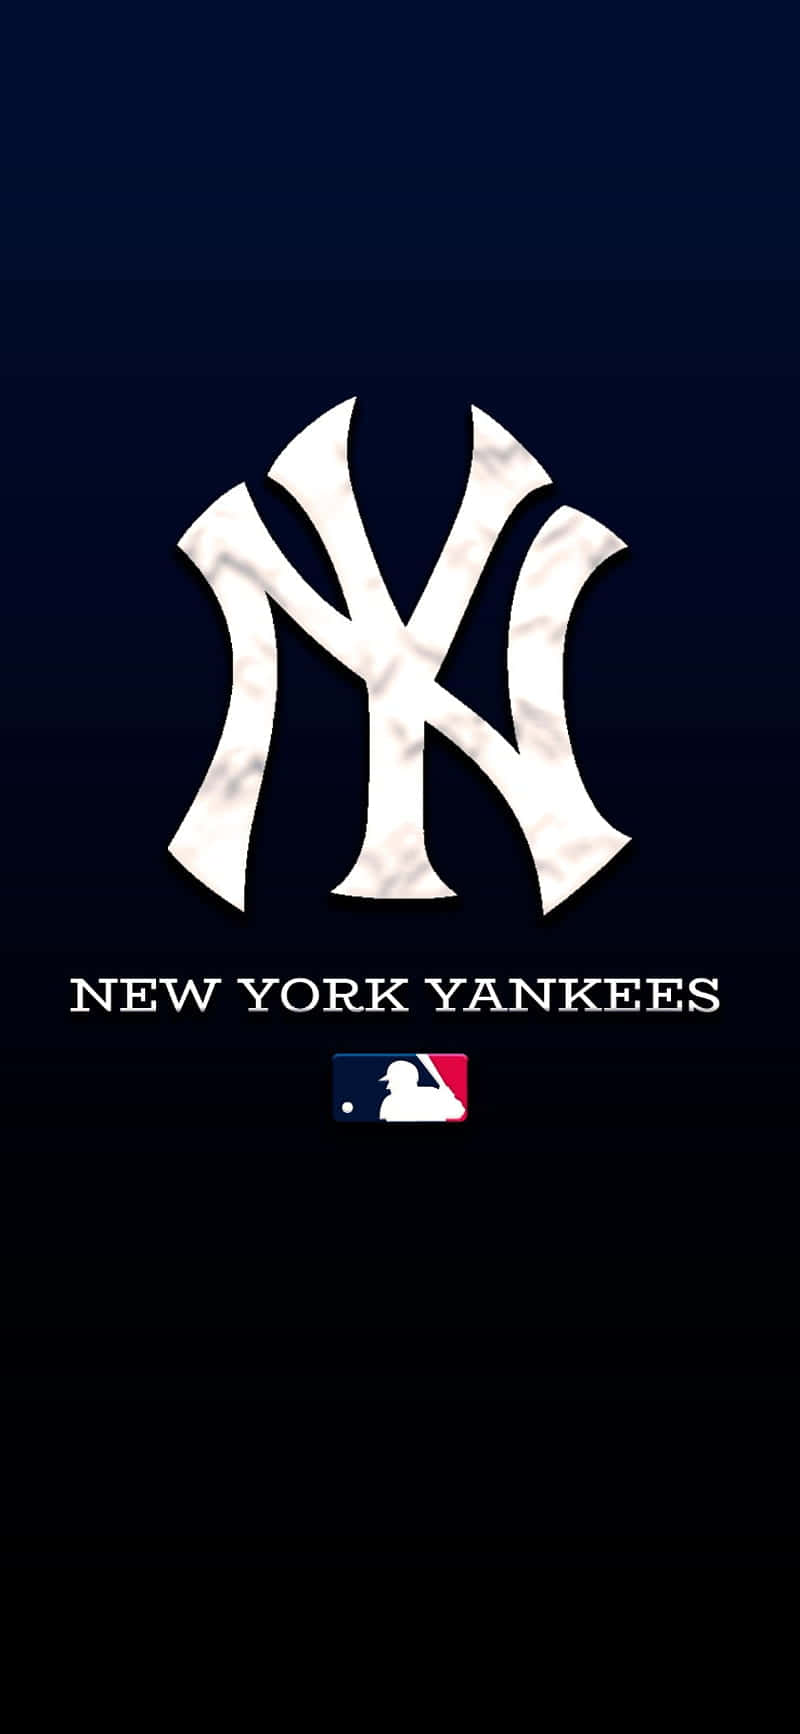 Download Keep Up With The New York Yankees On Your Mobile Device